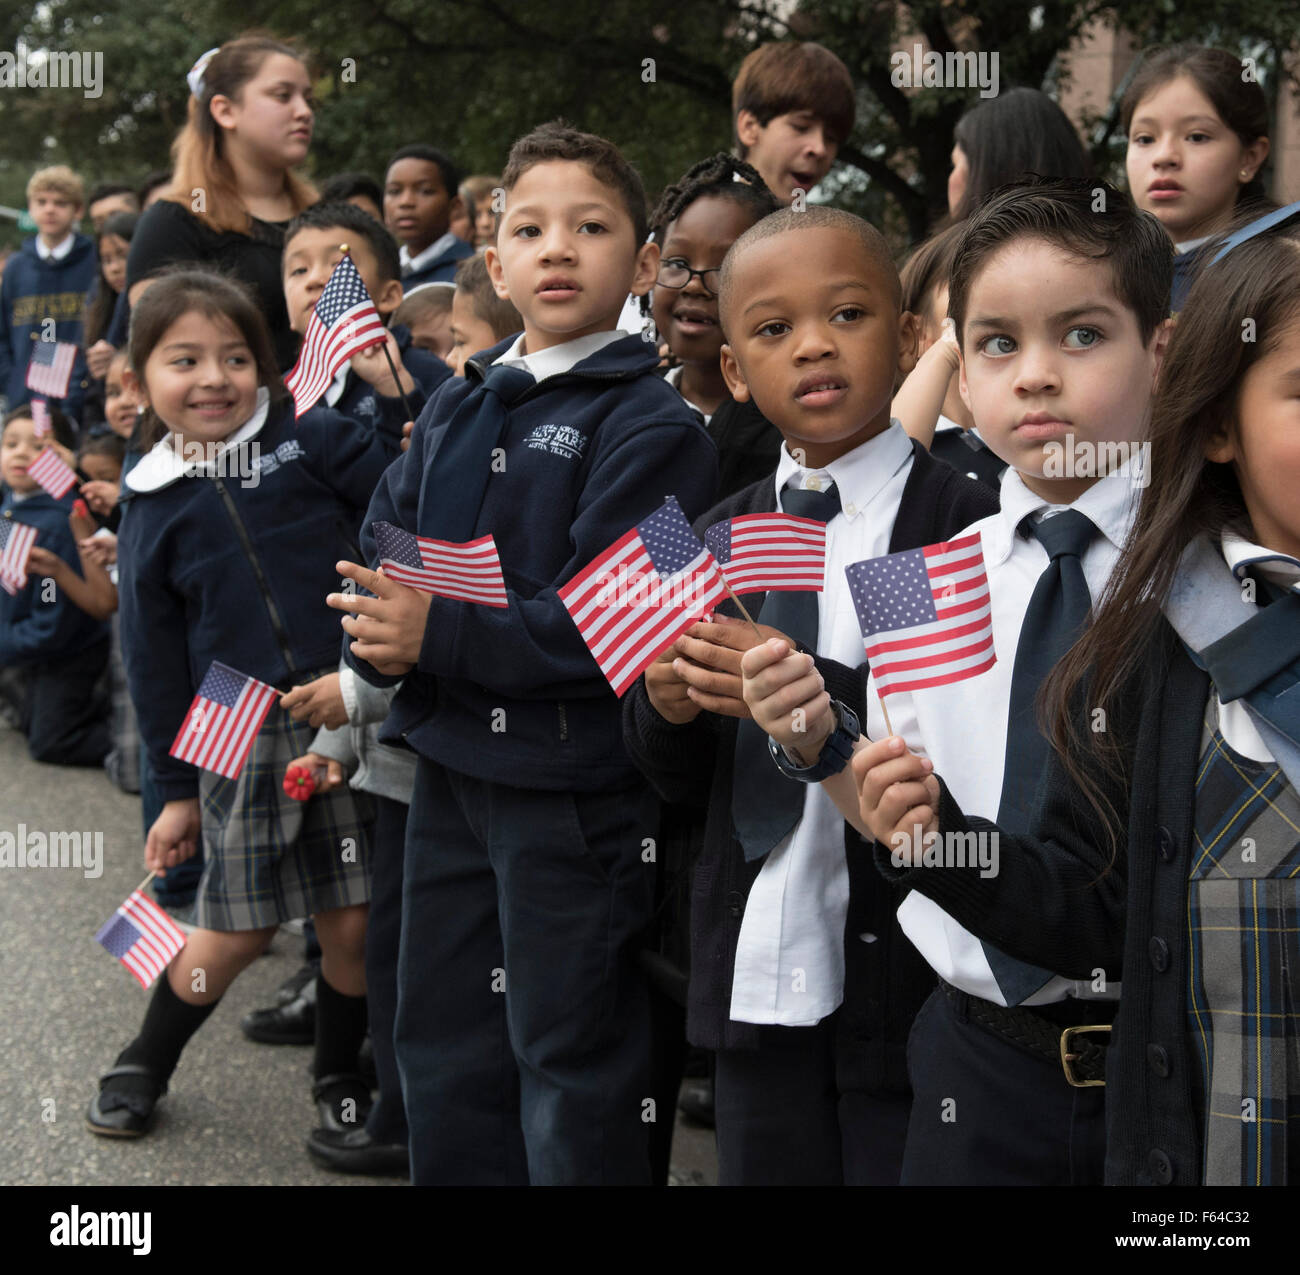 Austin, Texas USA November 11, 2015: Catholic schoolchildren from Saint Mary's in Austin cheer during the Veteran's Day parade up Congress Avenue and ceremony at the Texas Capitol. Several thousand Texans lined Congress Avenue to witness military heroes, marching bands and floats in the annual parade. Credit:  Bob Daemmrich/Alamy Live News Stock Photo